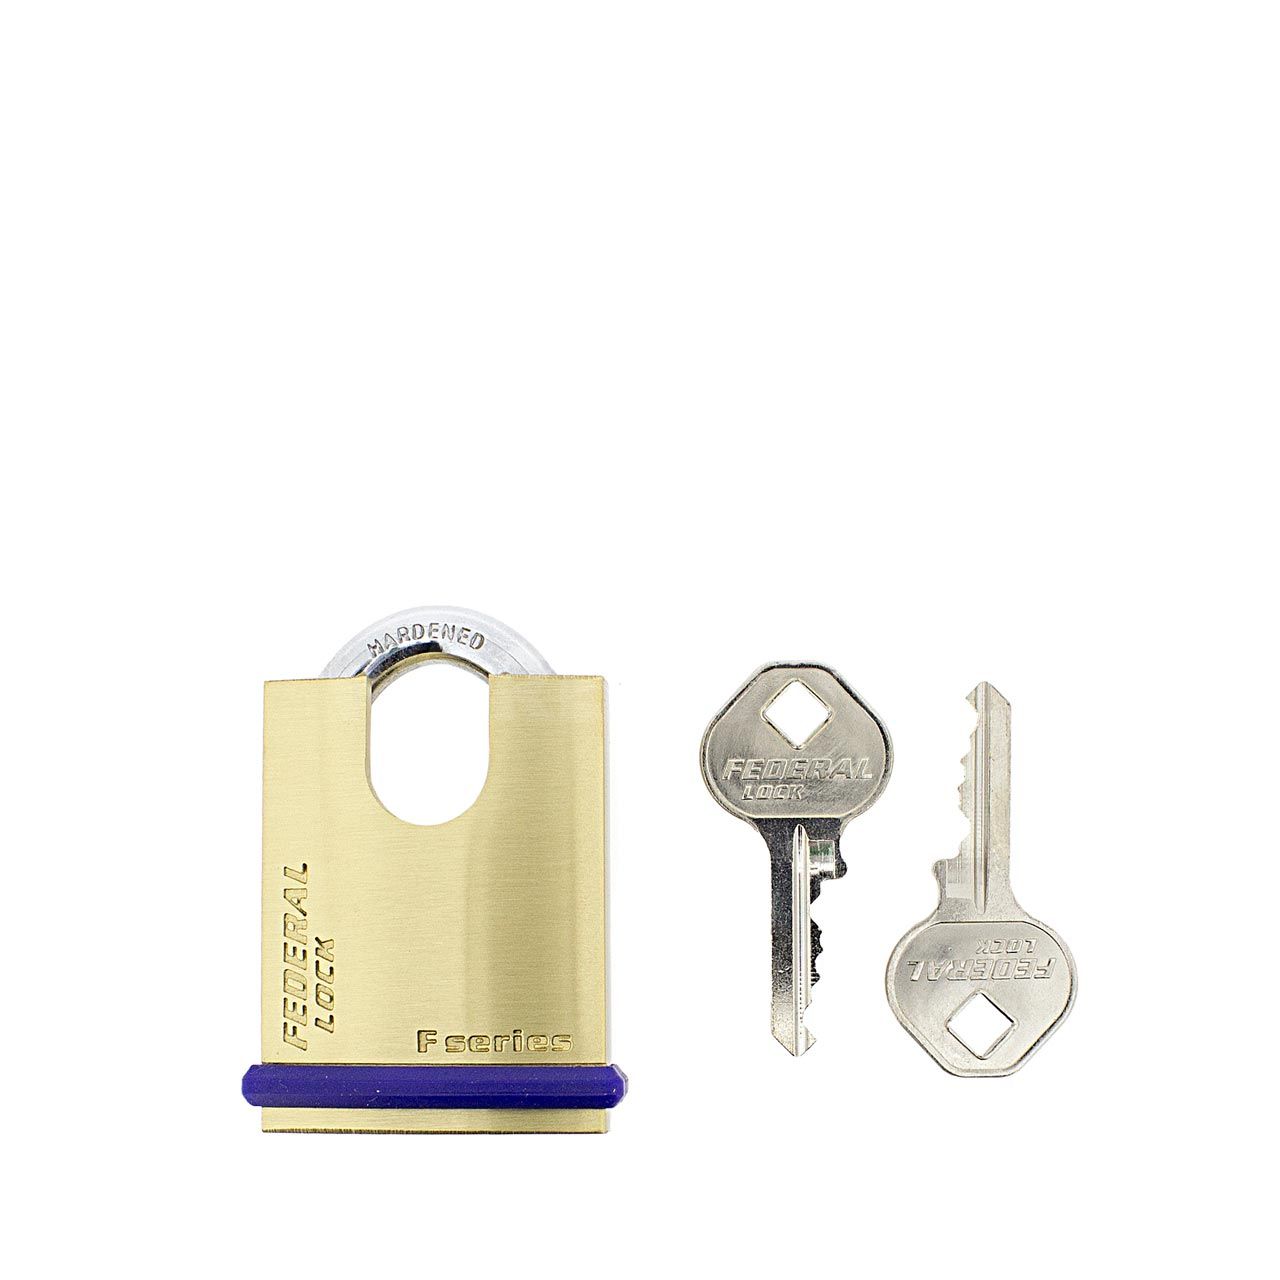 Dimensions Image: Federal 40mm Brass Closed Shackle Padlock